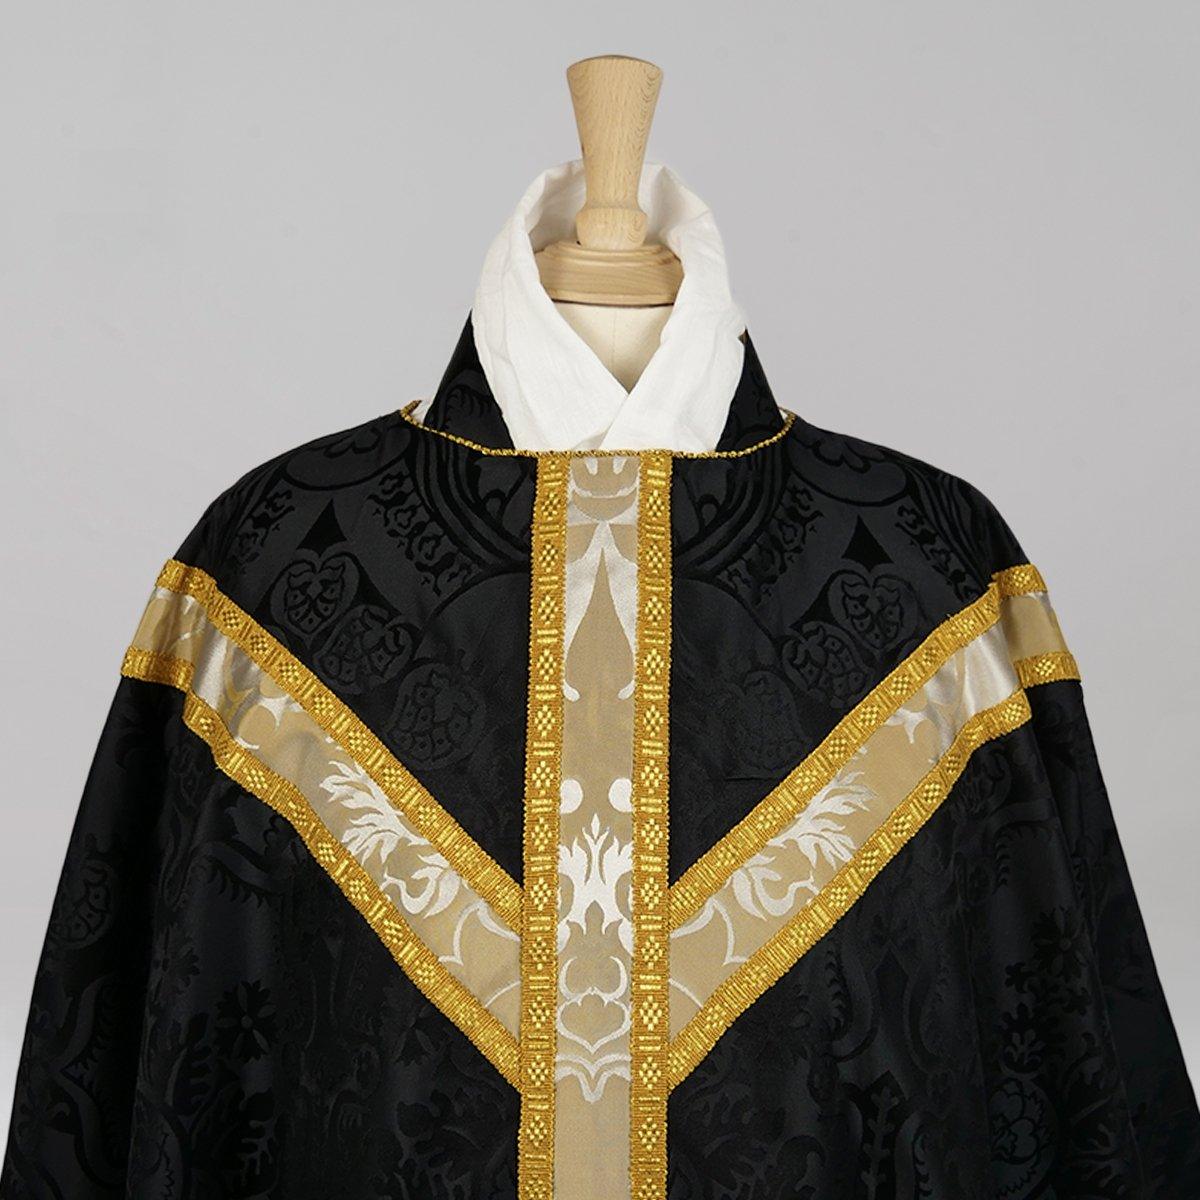 Full Gothic Chasuble in Black 'Comper Cathedral' with Sarum Orphreys of Oyster & Old Gold 'Bellini' - Watts & Co.